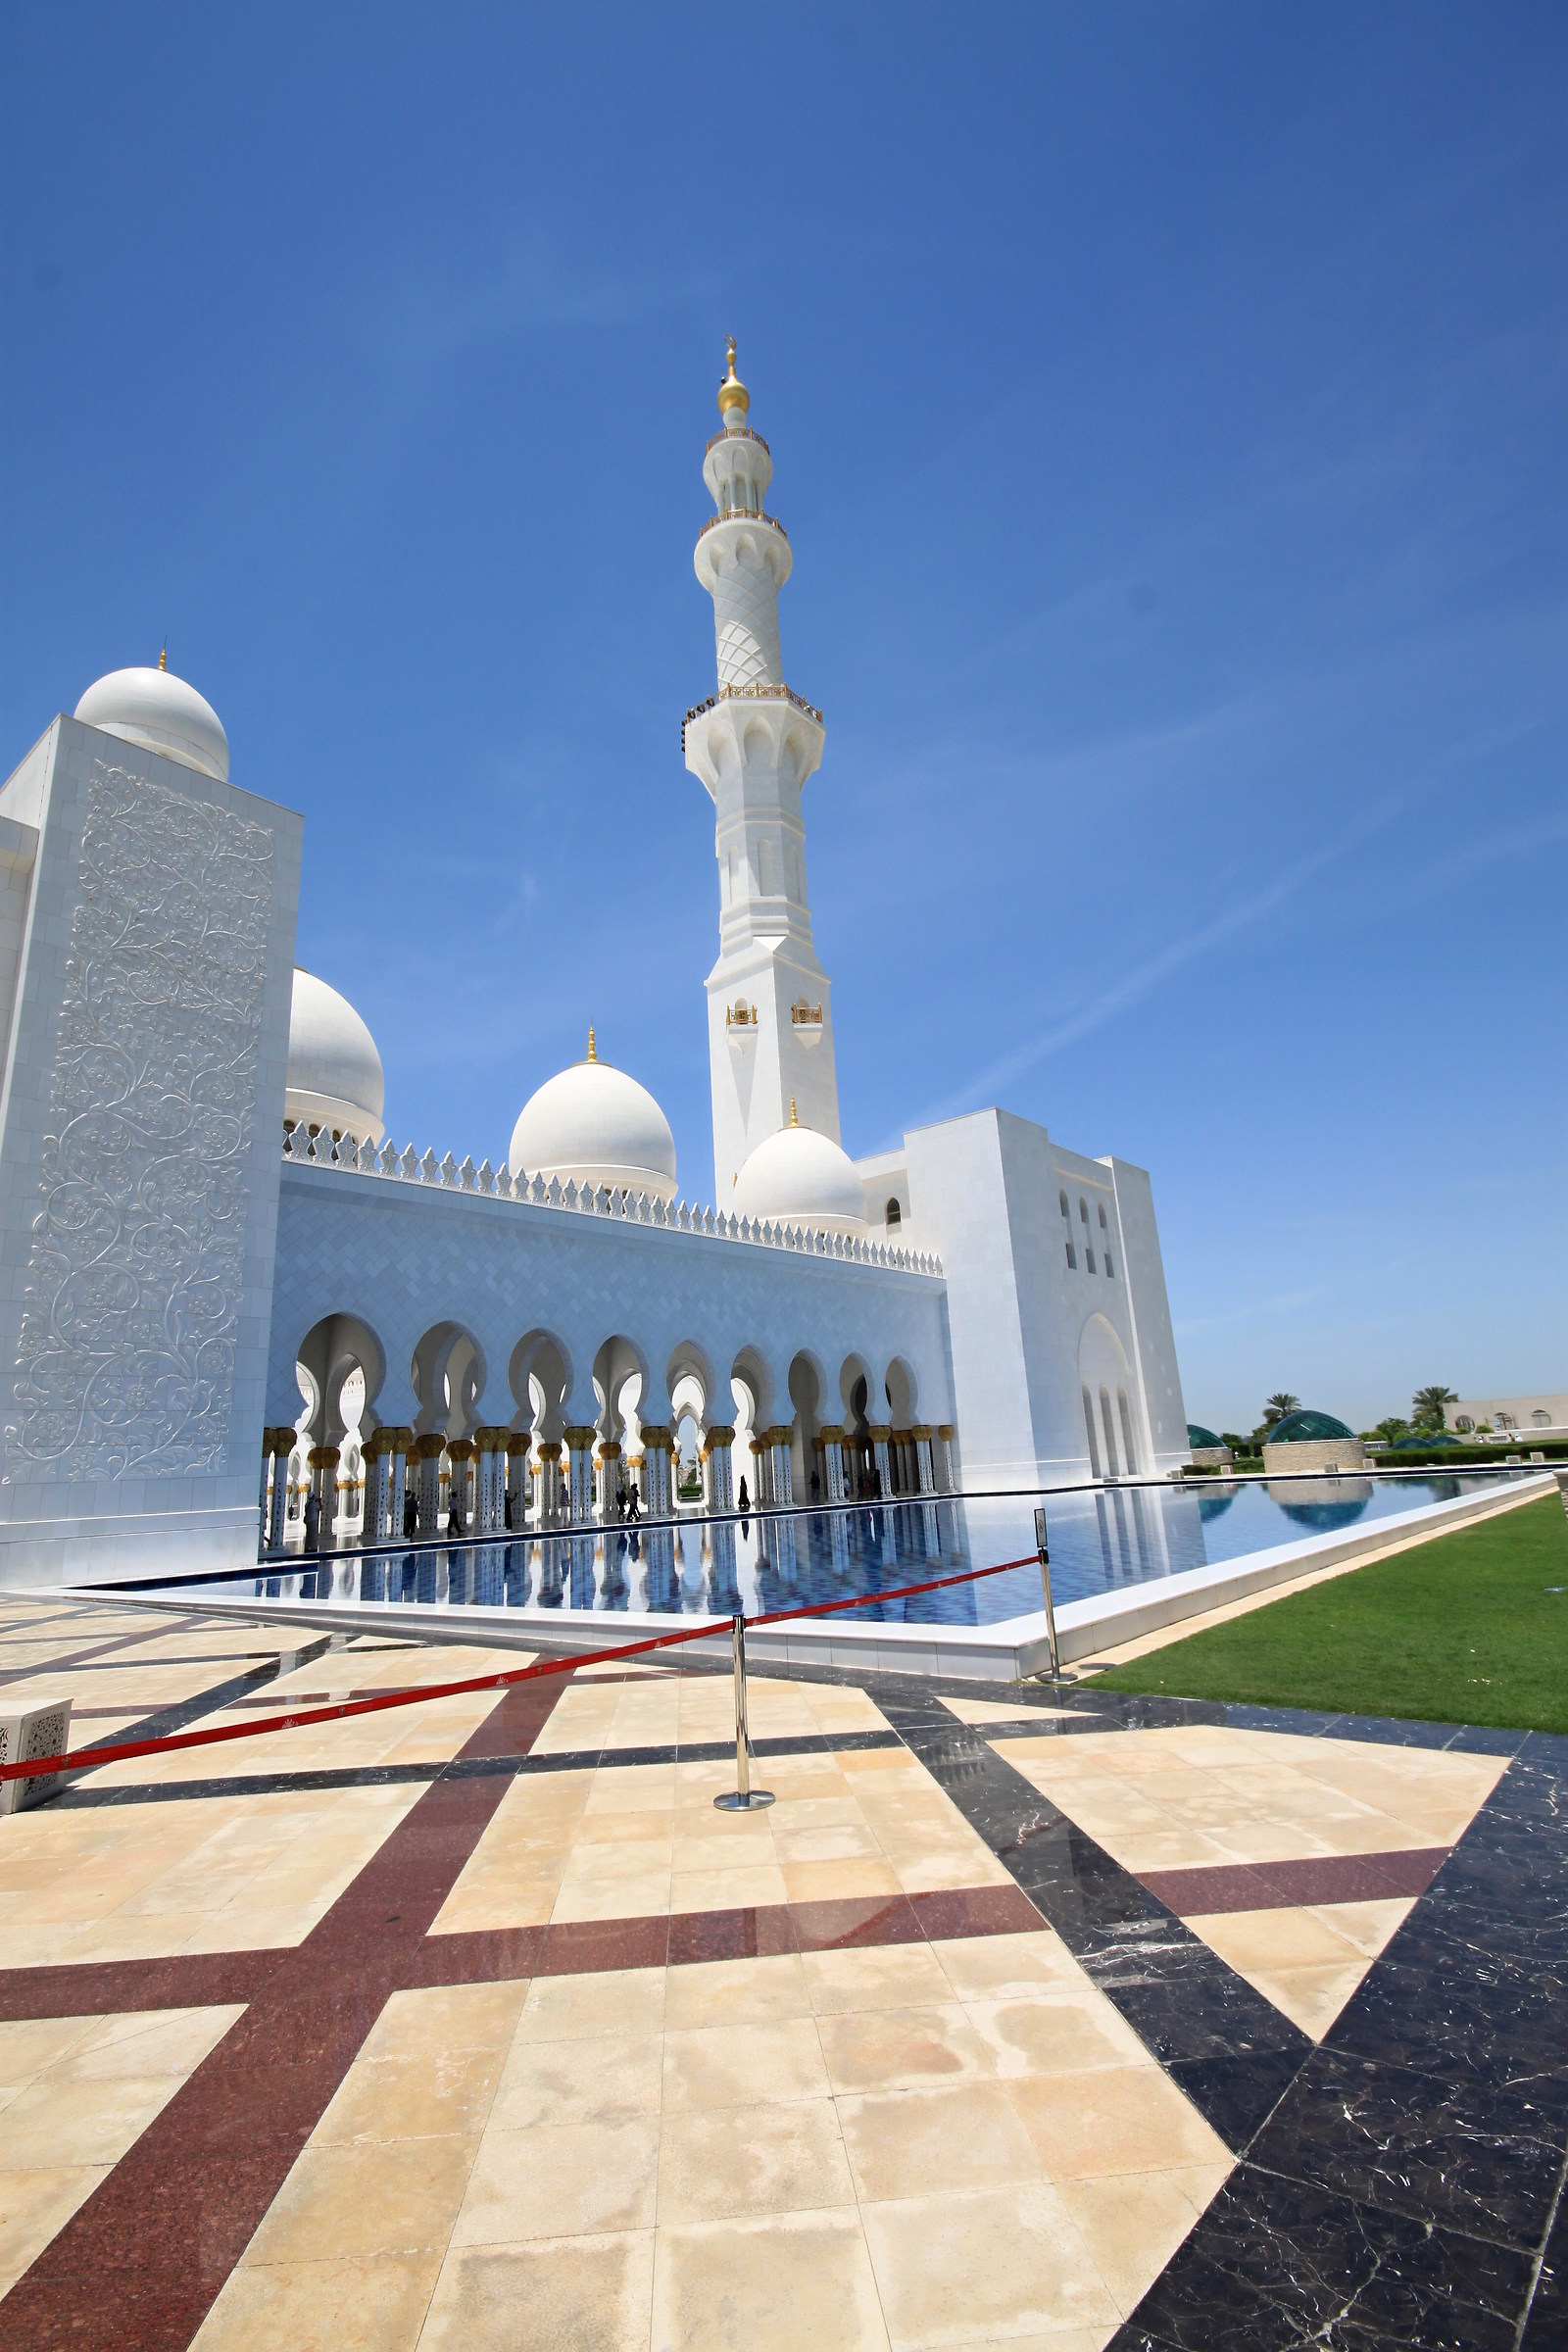 New perspective of the Sheikh Zayed Grand Mosque...